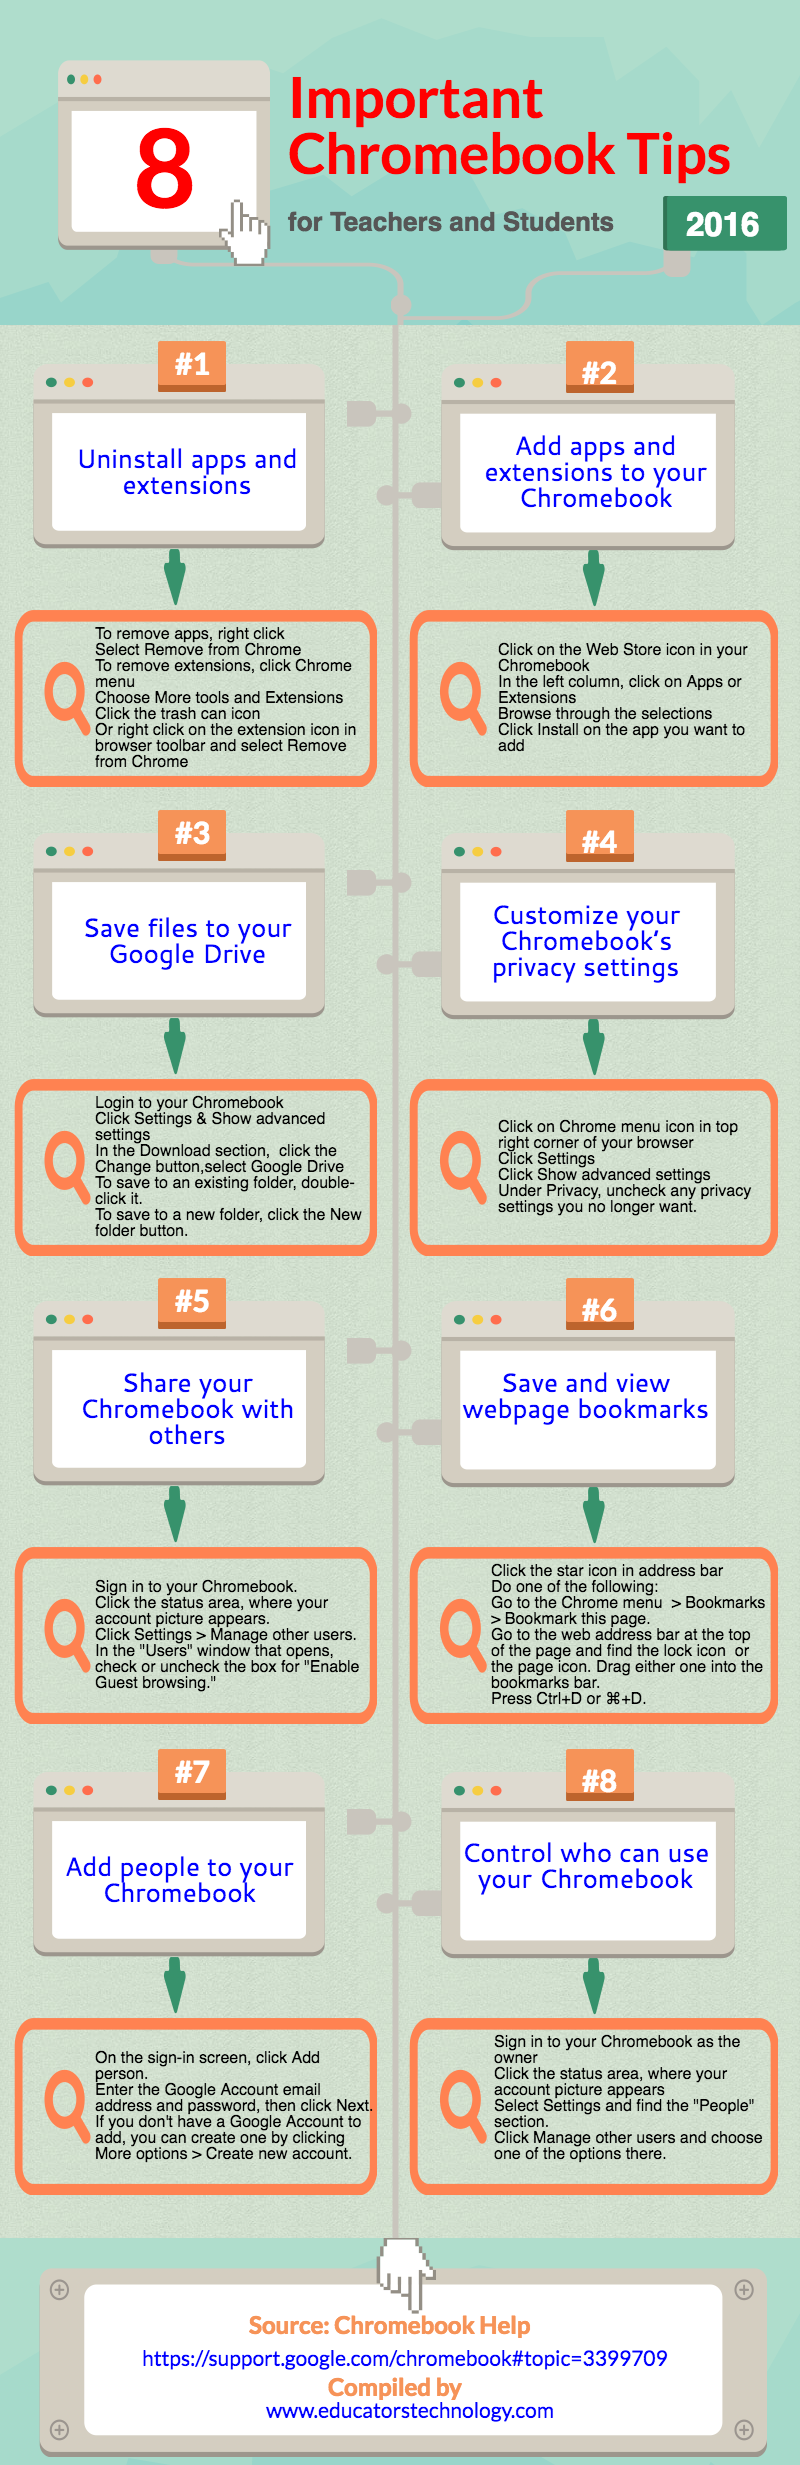 An Excellent Infographic Featuring Basic Chromebook Tips for Teachers